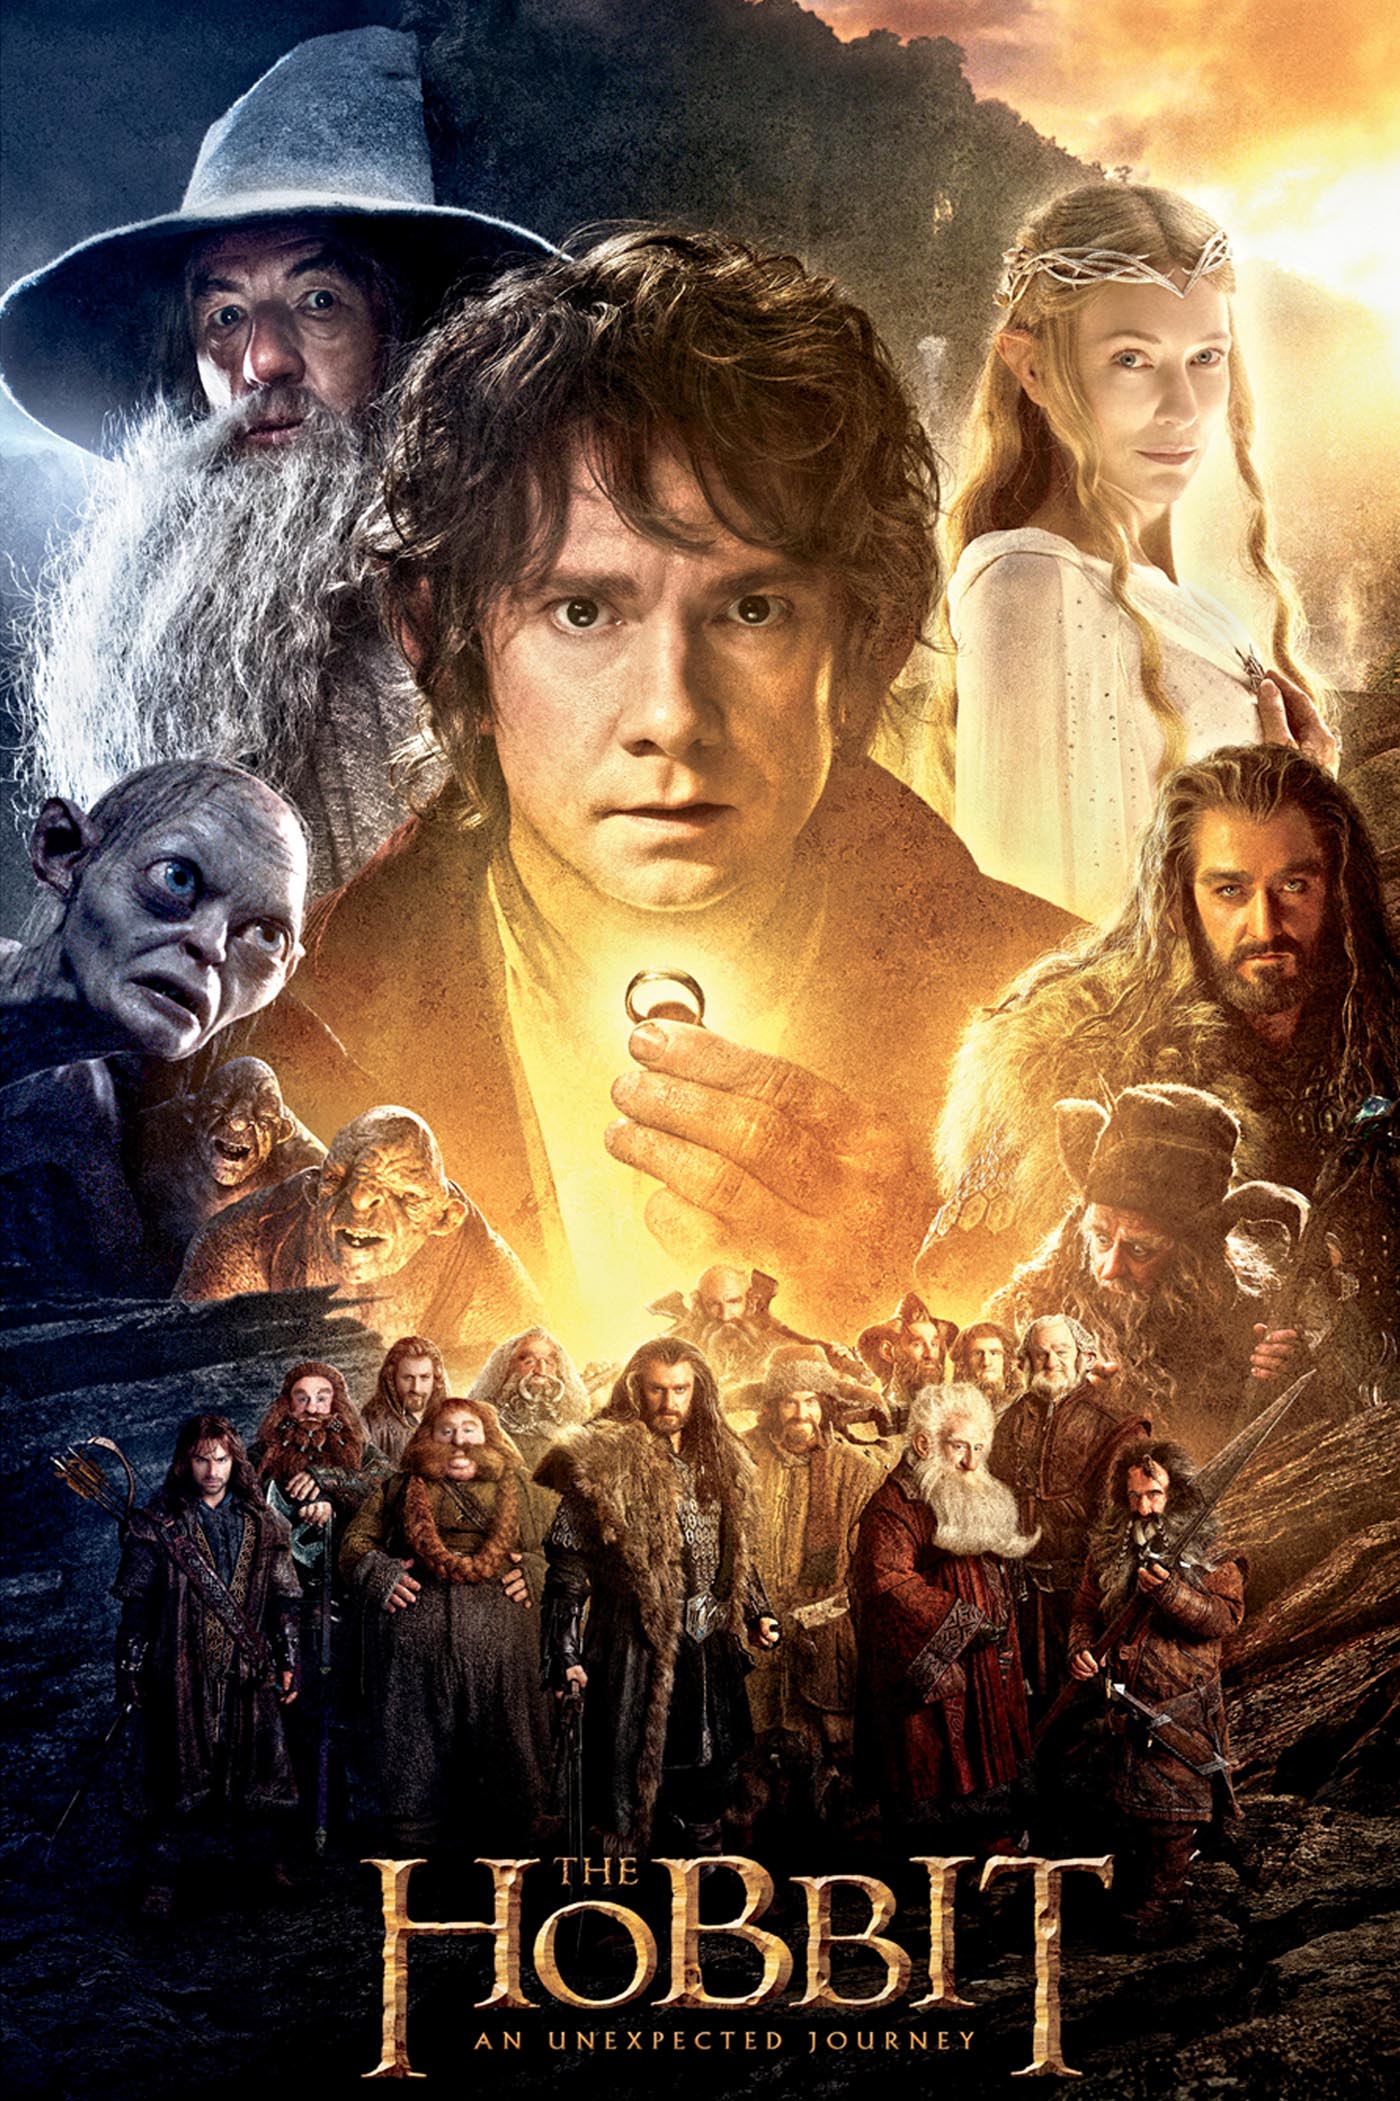 The Hobbit: An Unexpected Journey #2